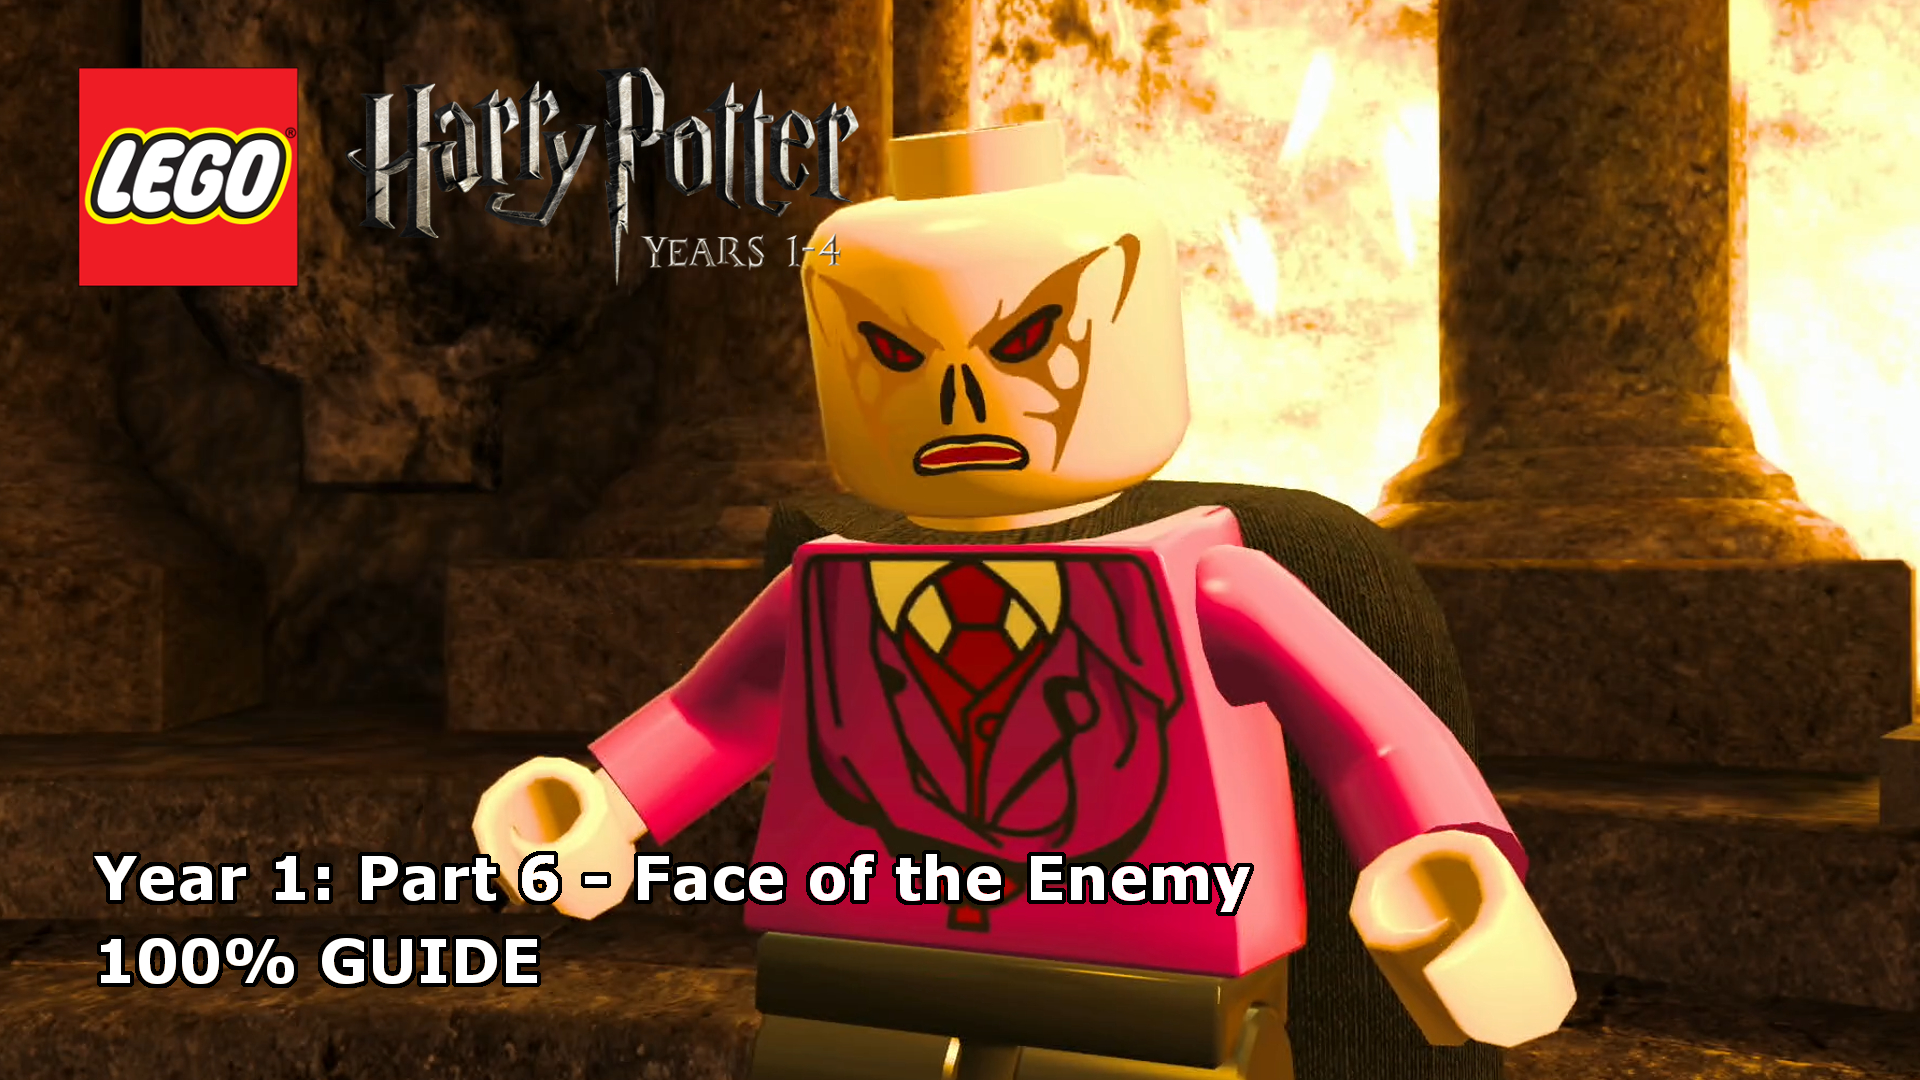 Lego Harry Potter: Years 1-4 – The Restricted Section 100% Guide